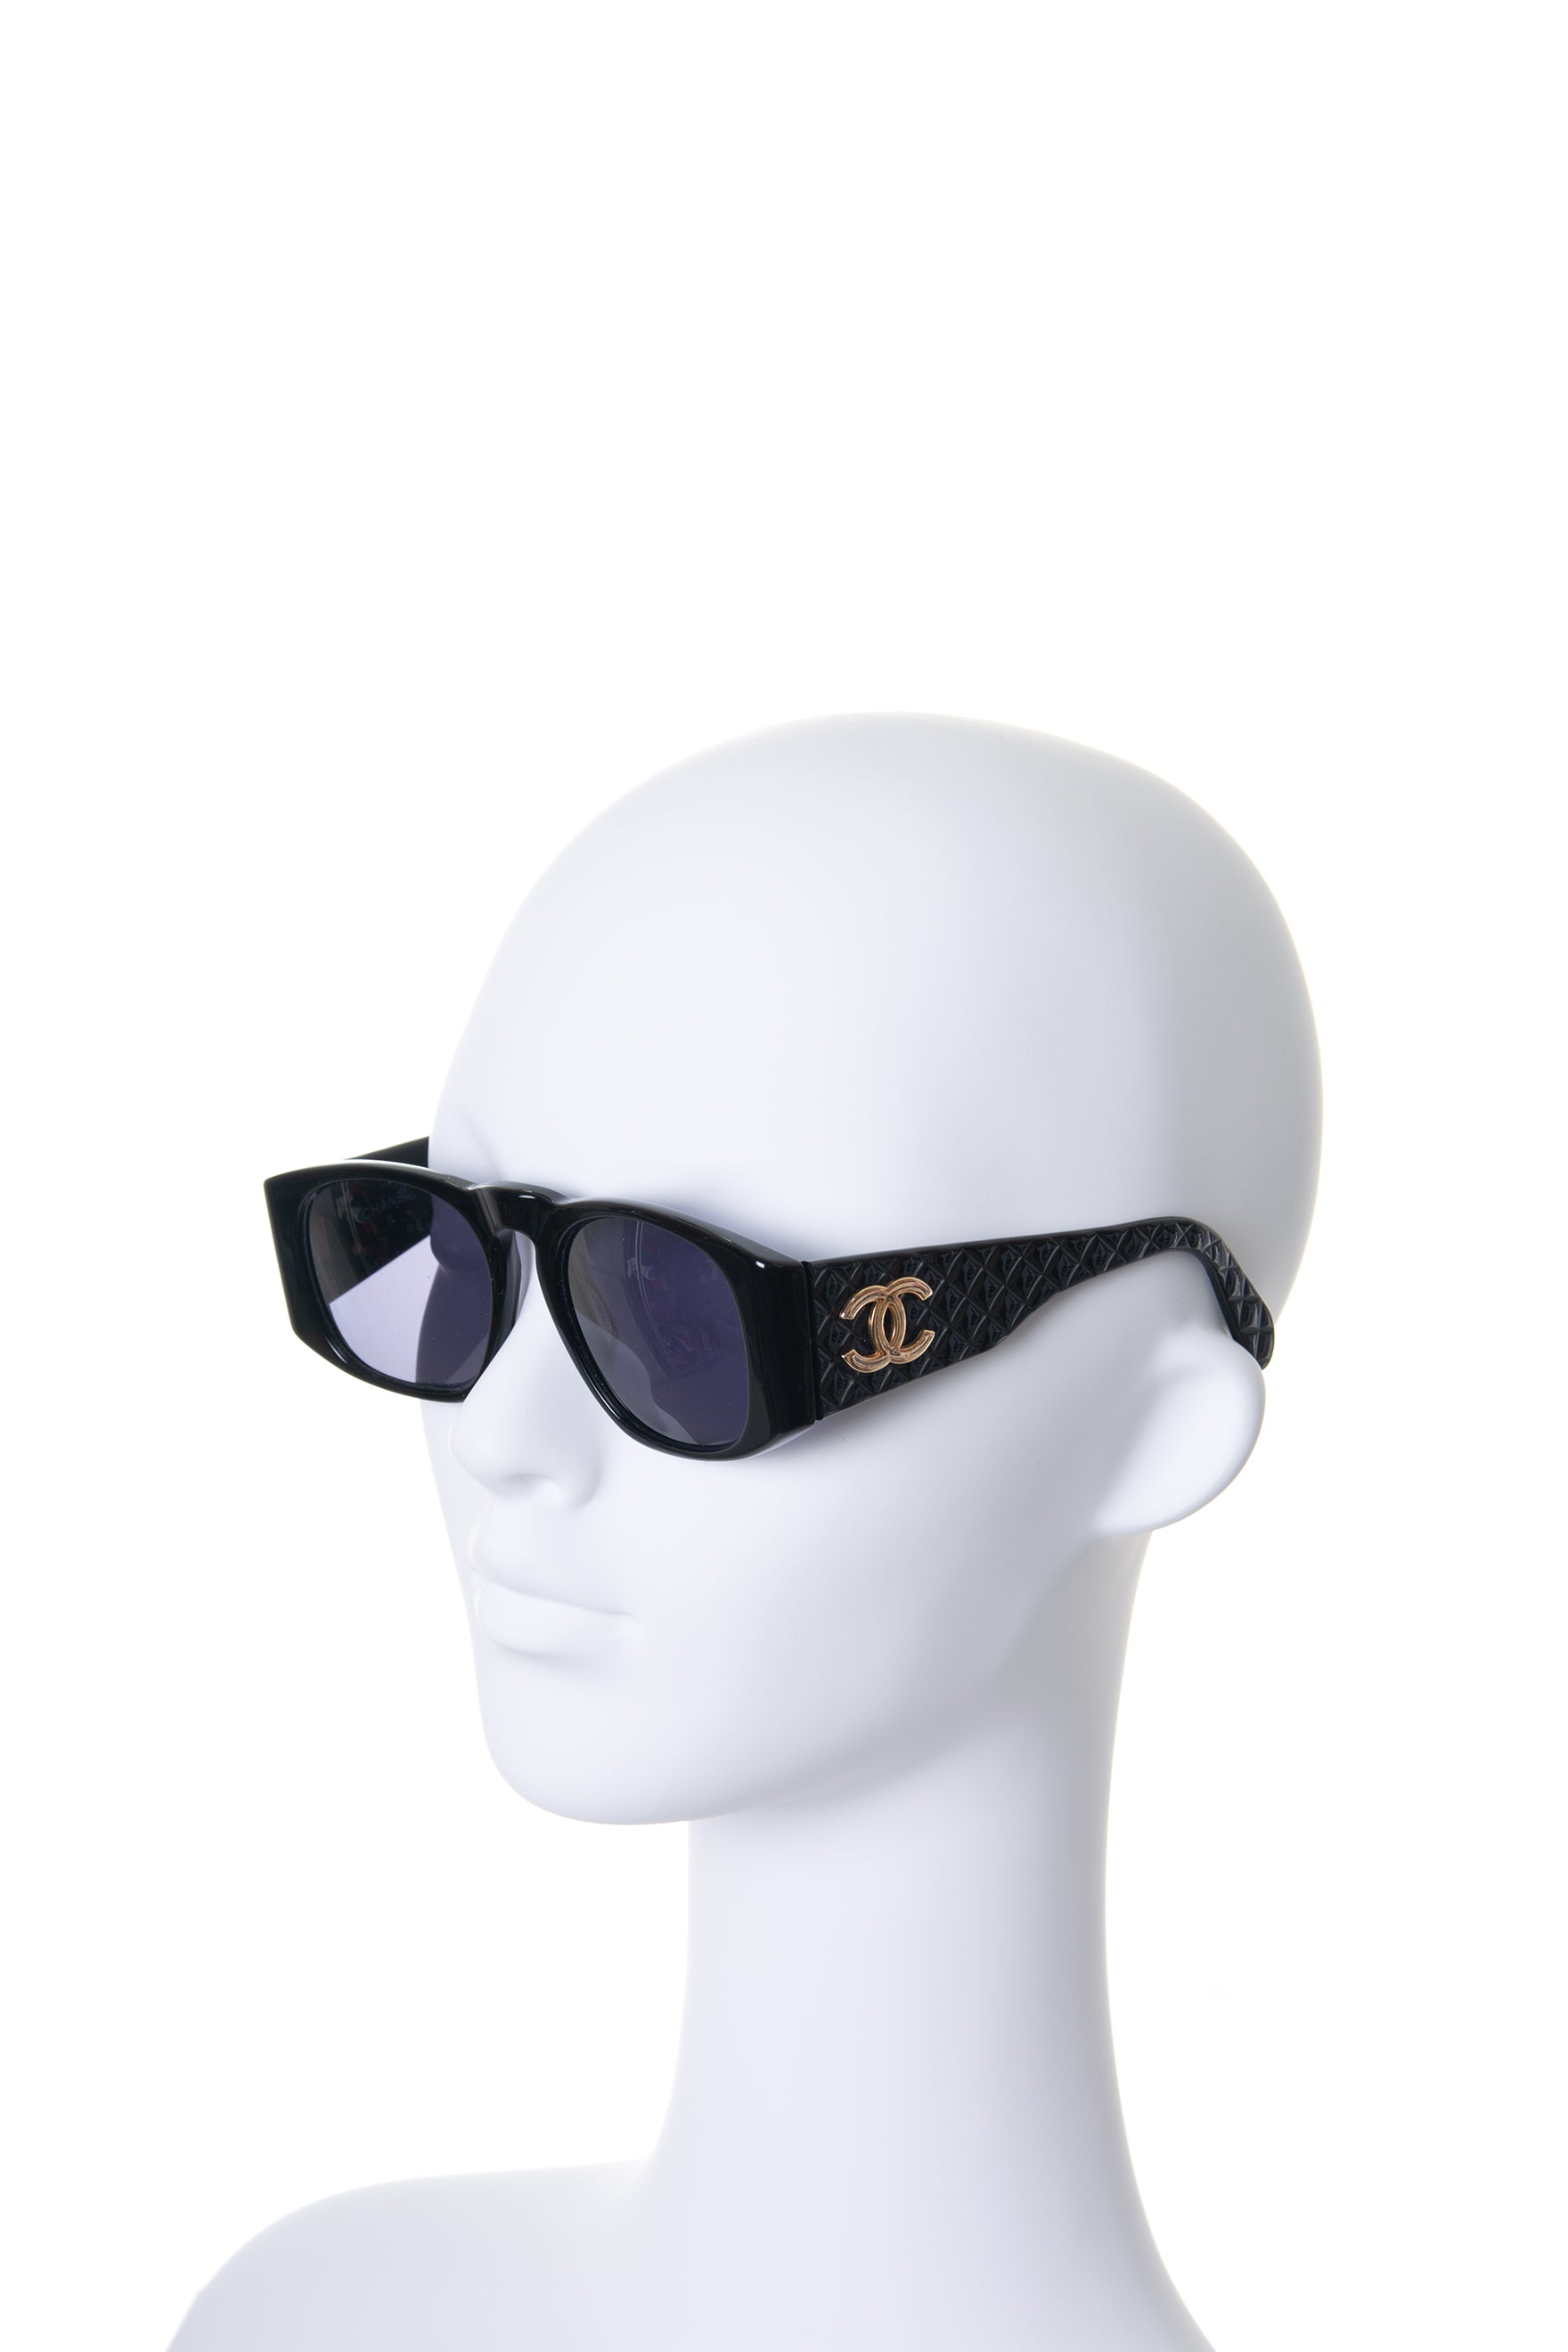 CHANEL, Accessories, Authentic Chanel Sunglass Eye Wear 451 94305 Italy